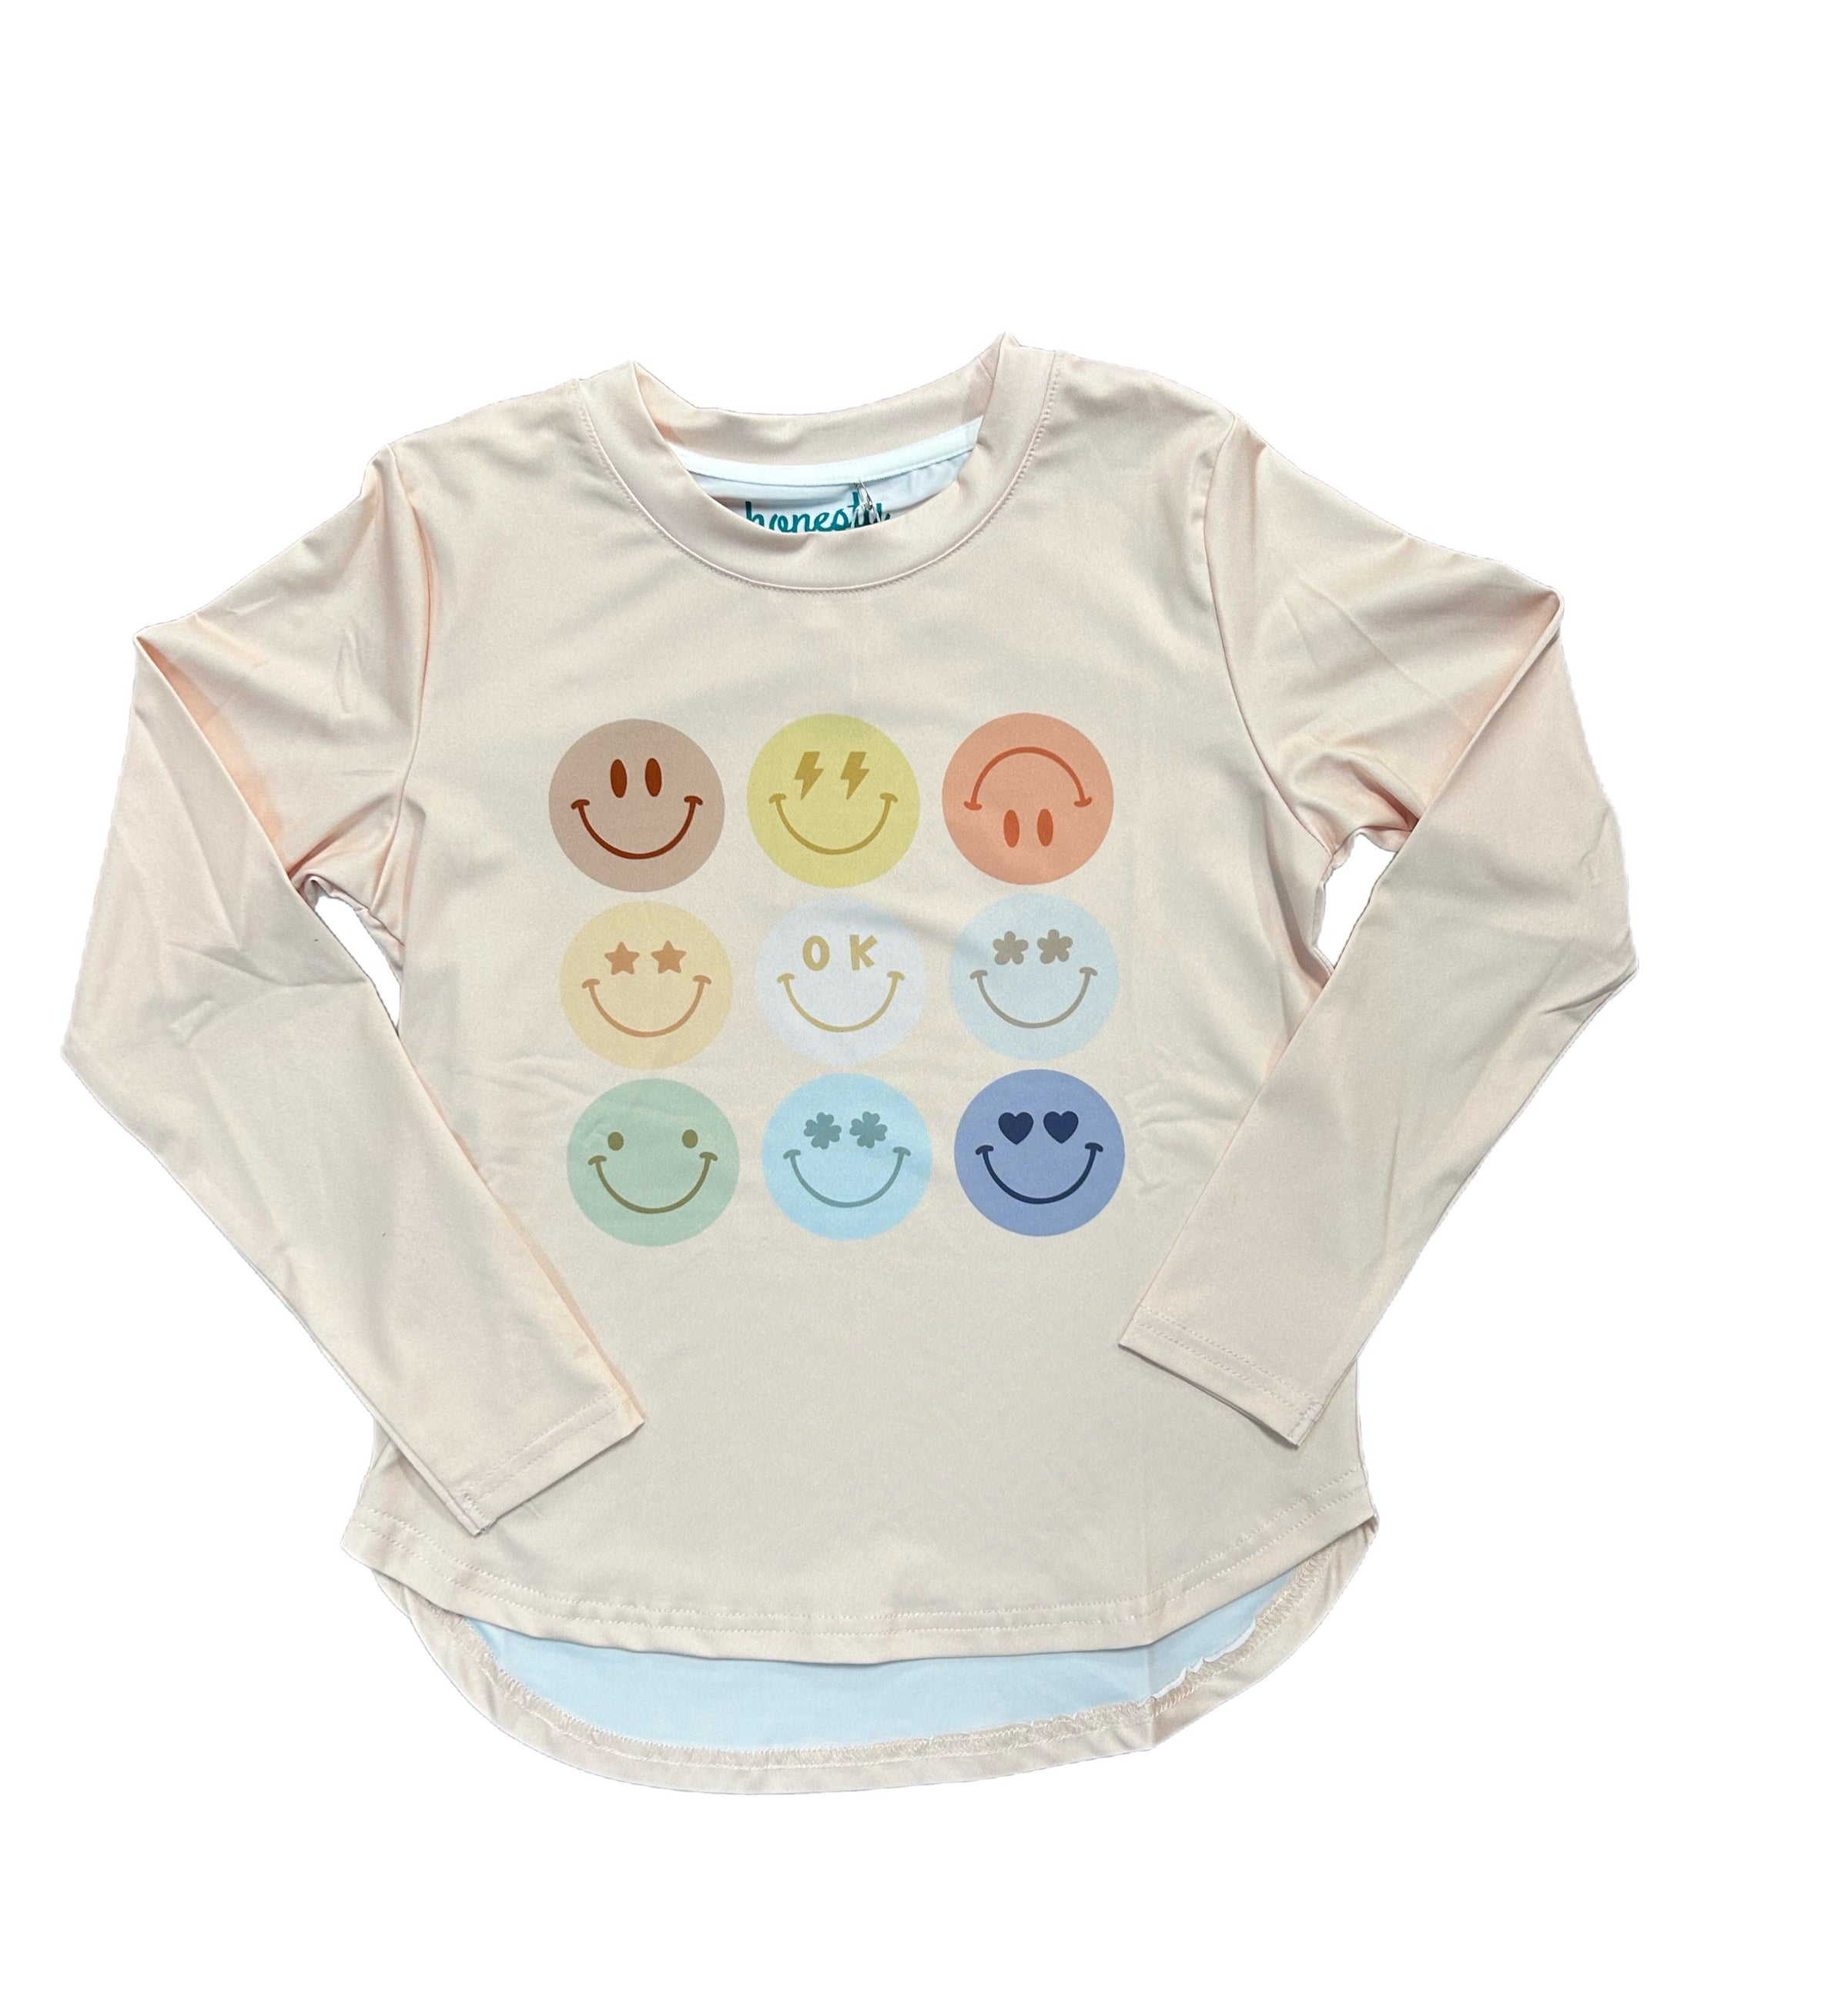 GIRLS ALL SMILES LONGSLEEVE PERFORMANCE GRAPHIC TEE